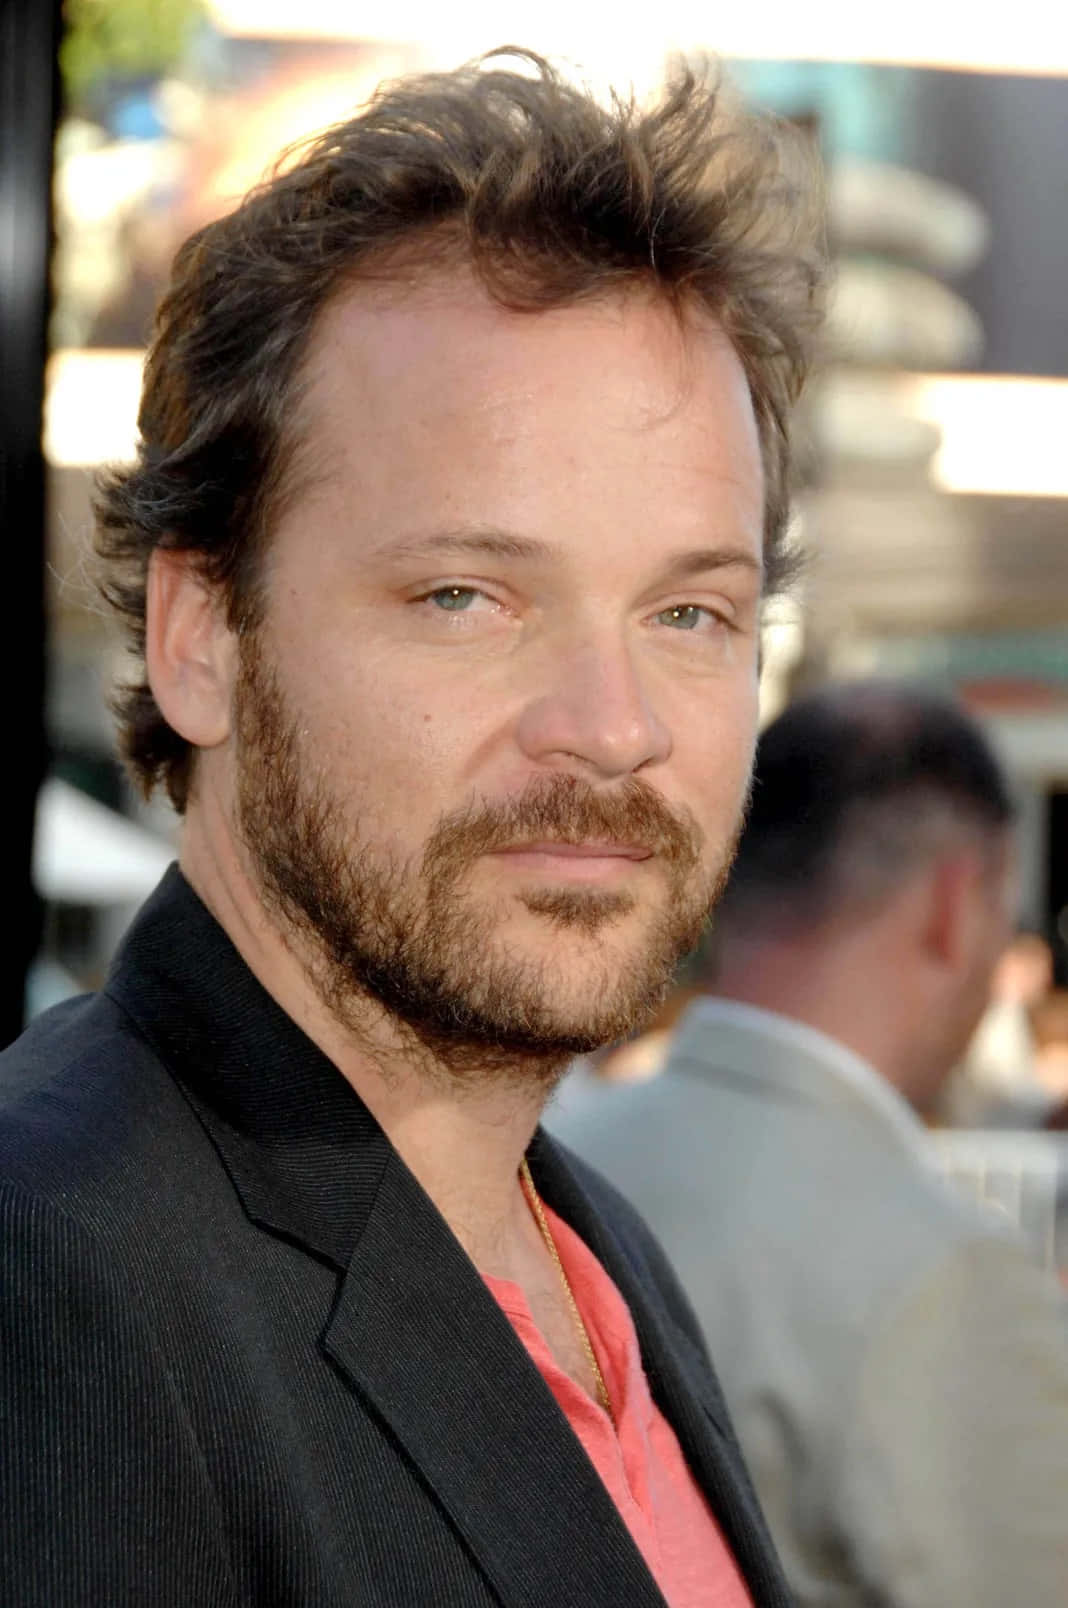 - Peter Sarsgaard attending the world premiere of "The House with a Clock in Its Walls" Wallpaper